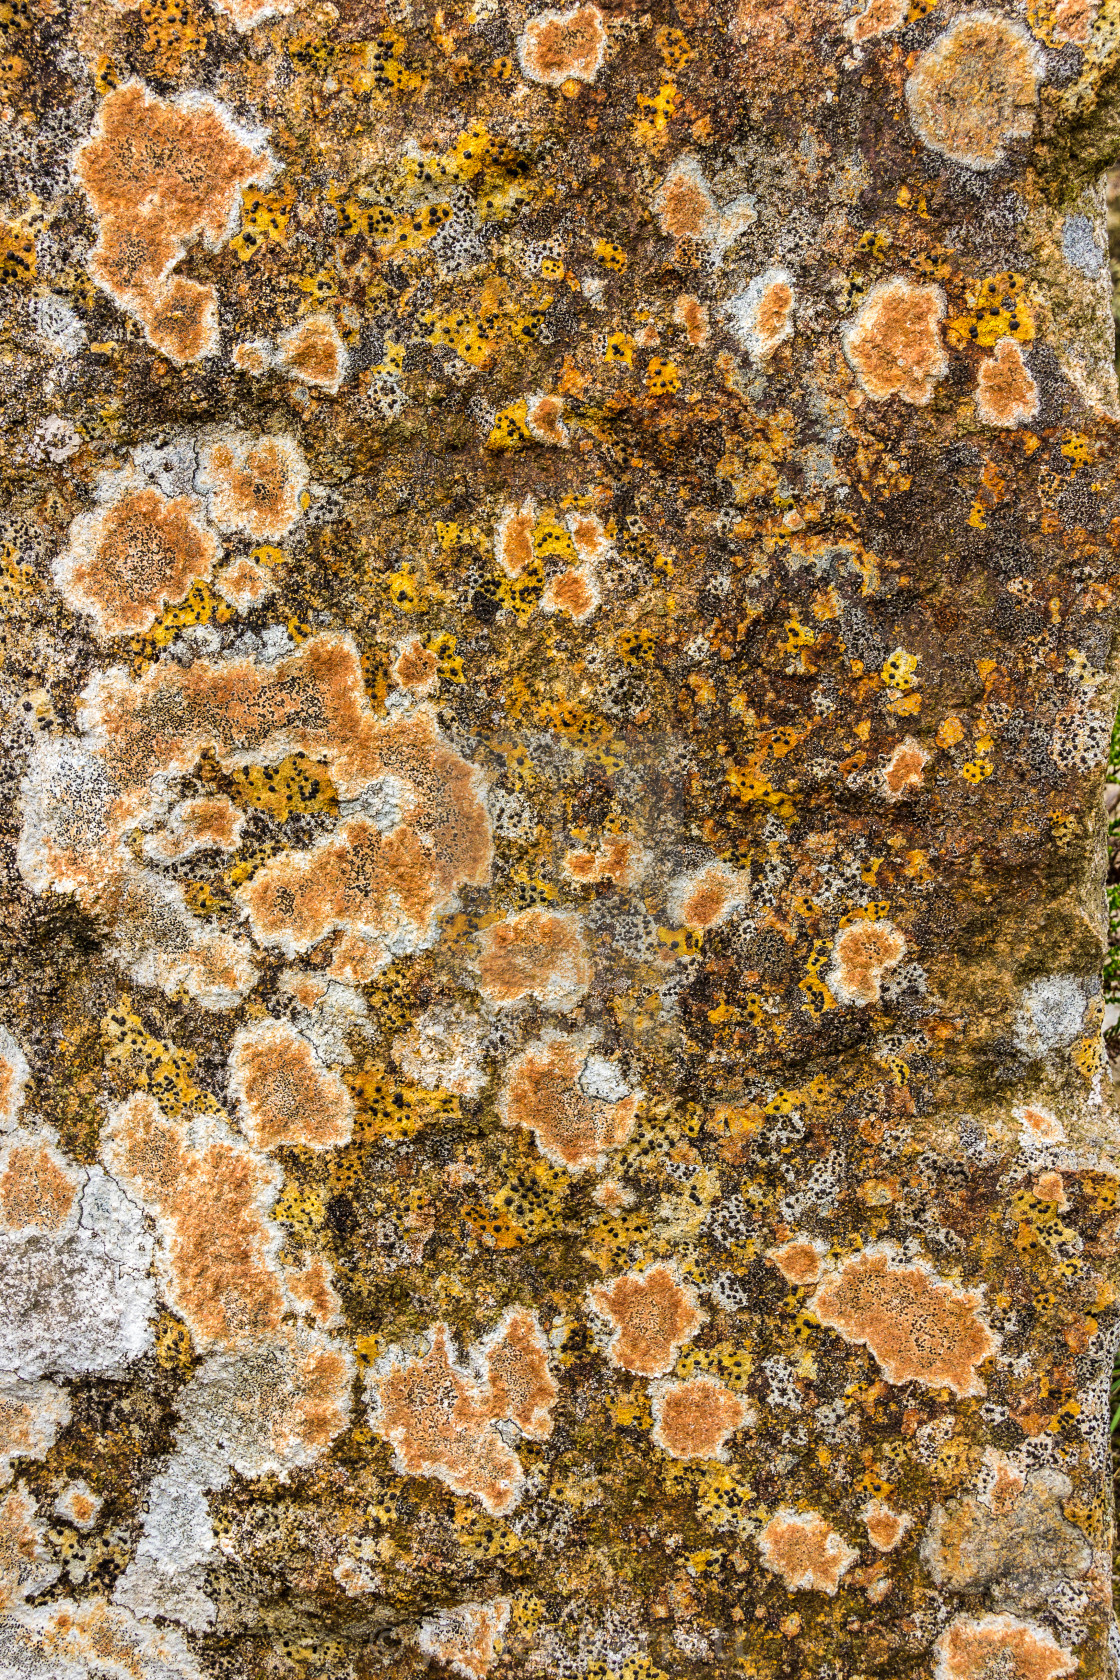 "Lichens on the quarry wall" stock image